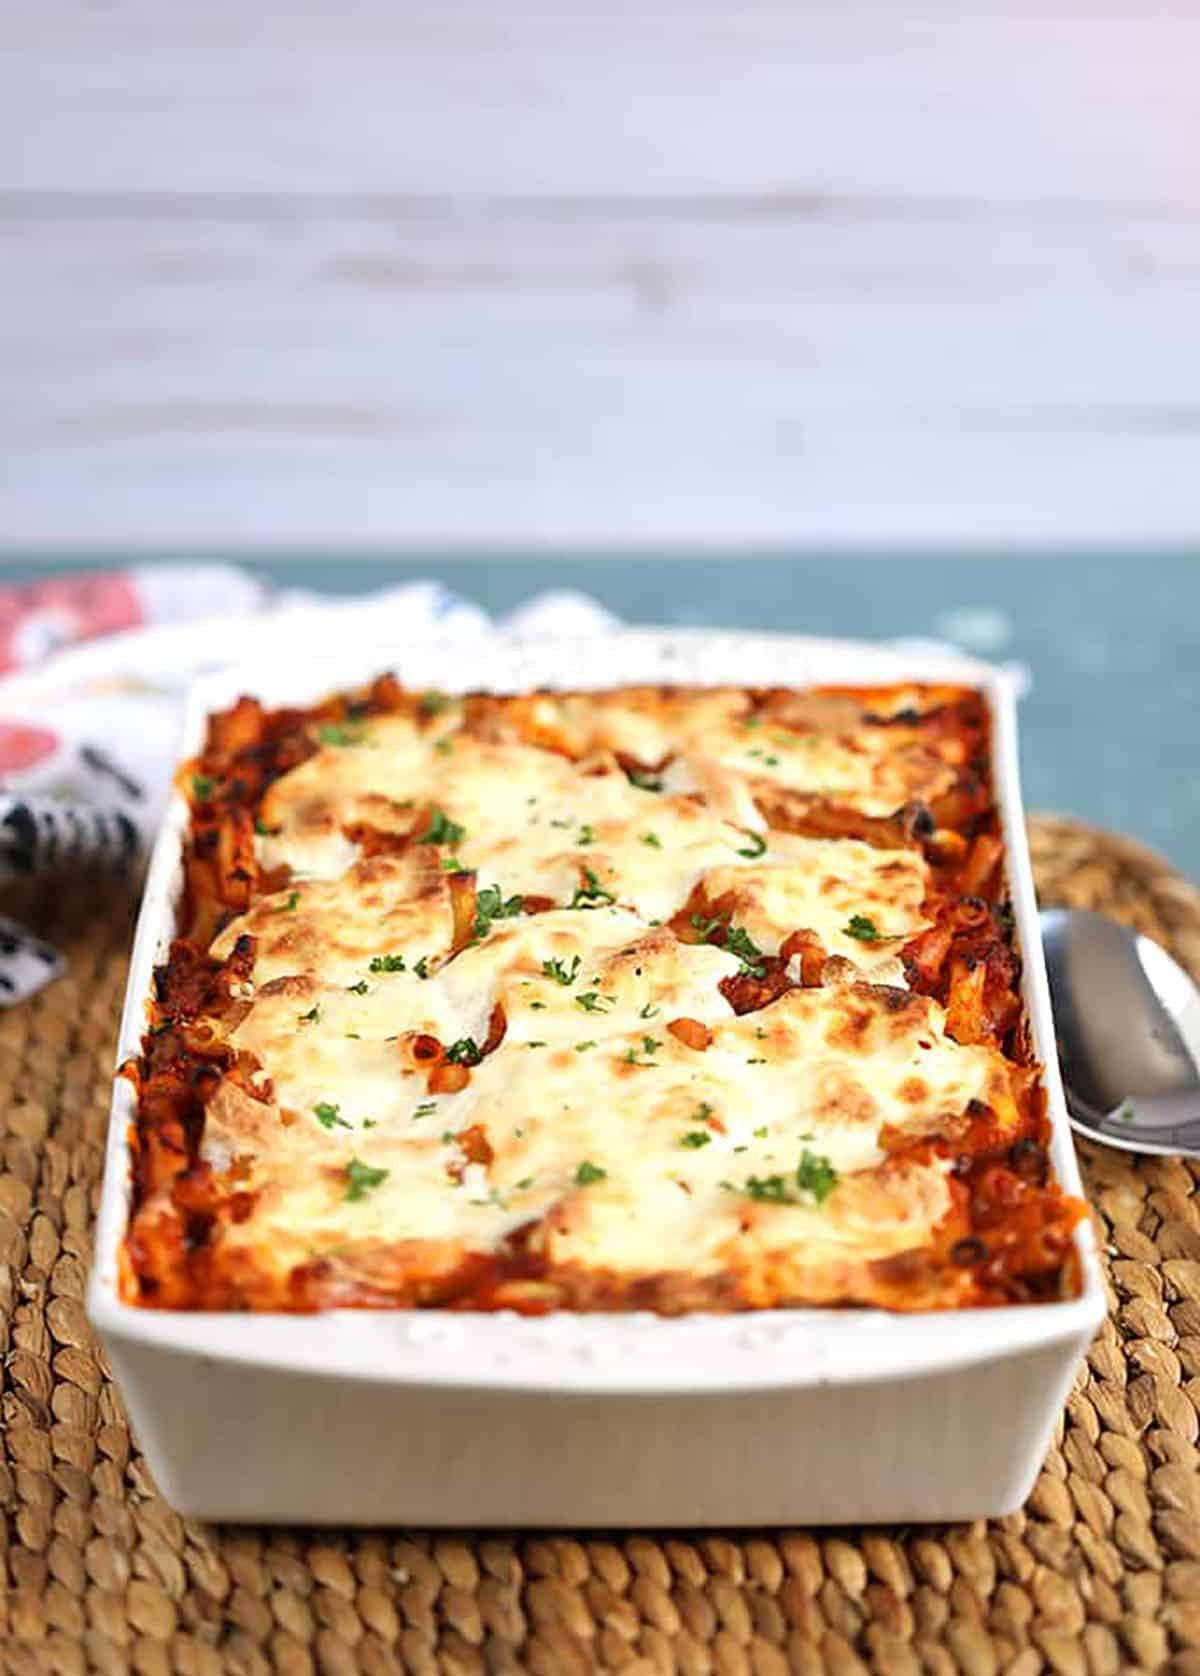 Baked Ziti recipe with melted mozzarella on top in a white rectangular baking dish on a wicker placemat on a blue background 